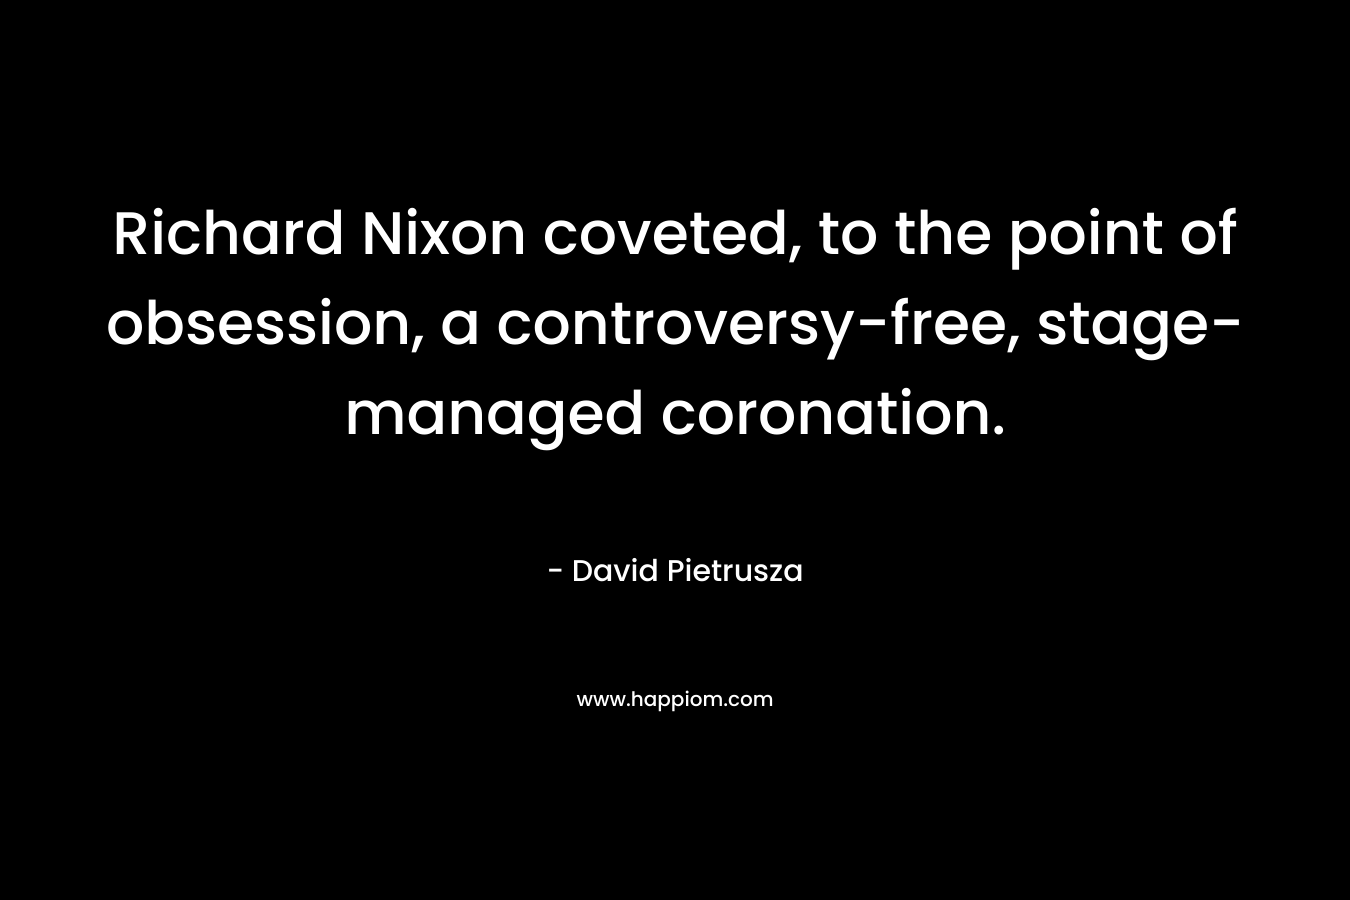 Richard Nixon coveted, to the point of obsession, a controversy-free, stage-managed coronation. – David Pietrusza